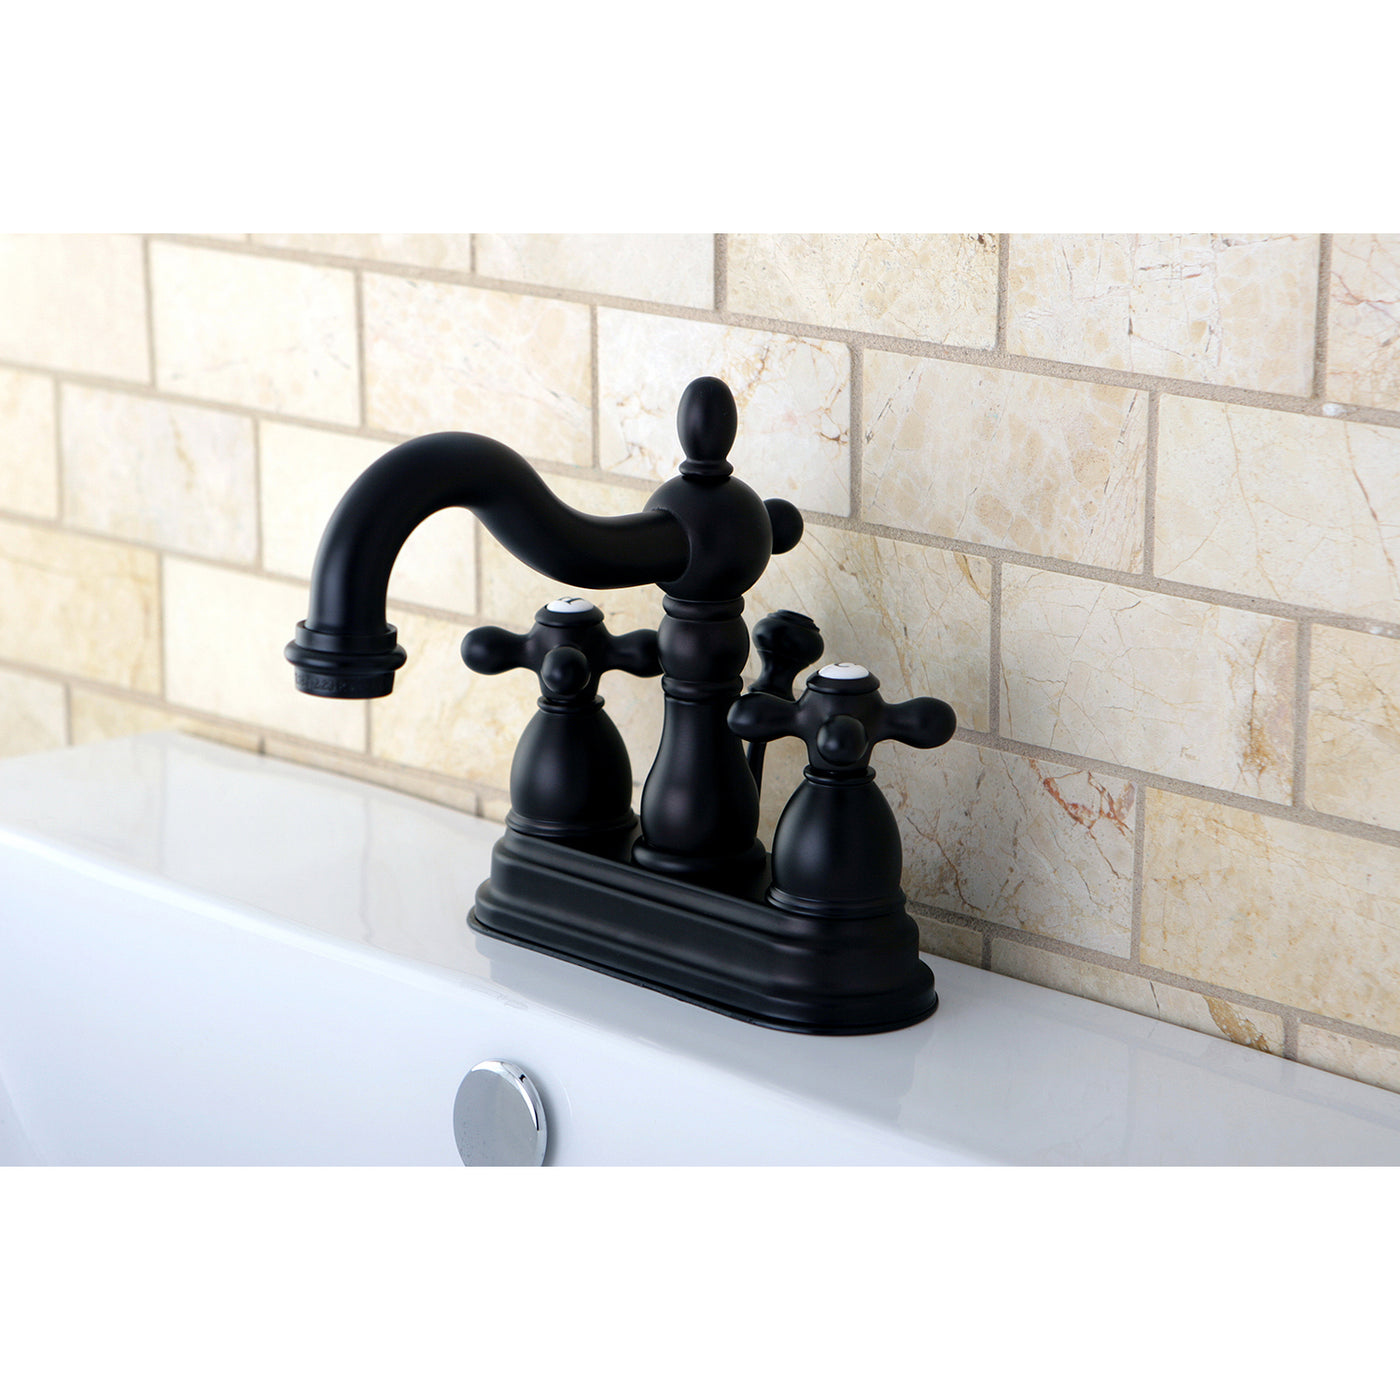 Elements of Design EB1605AX 4-Inch Centerset Bathroom Faucet with Plastic Pop-Up, Oil Rubbed Bronze